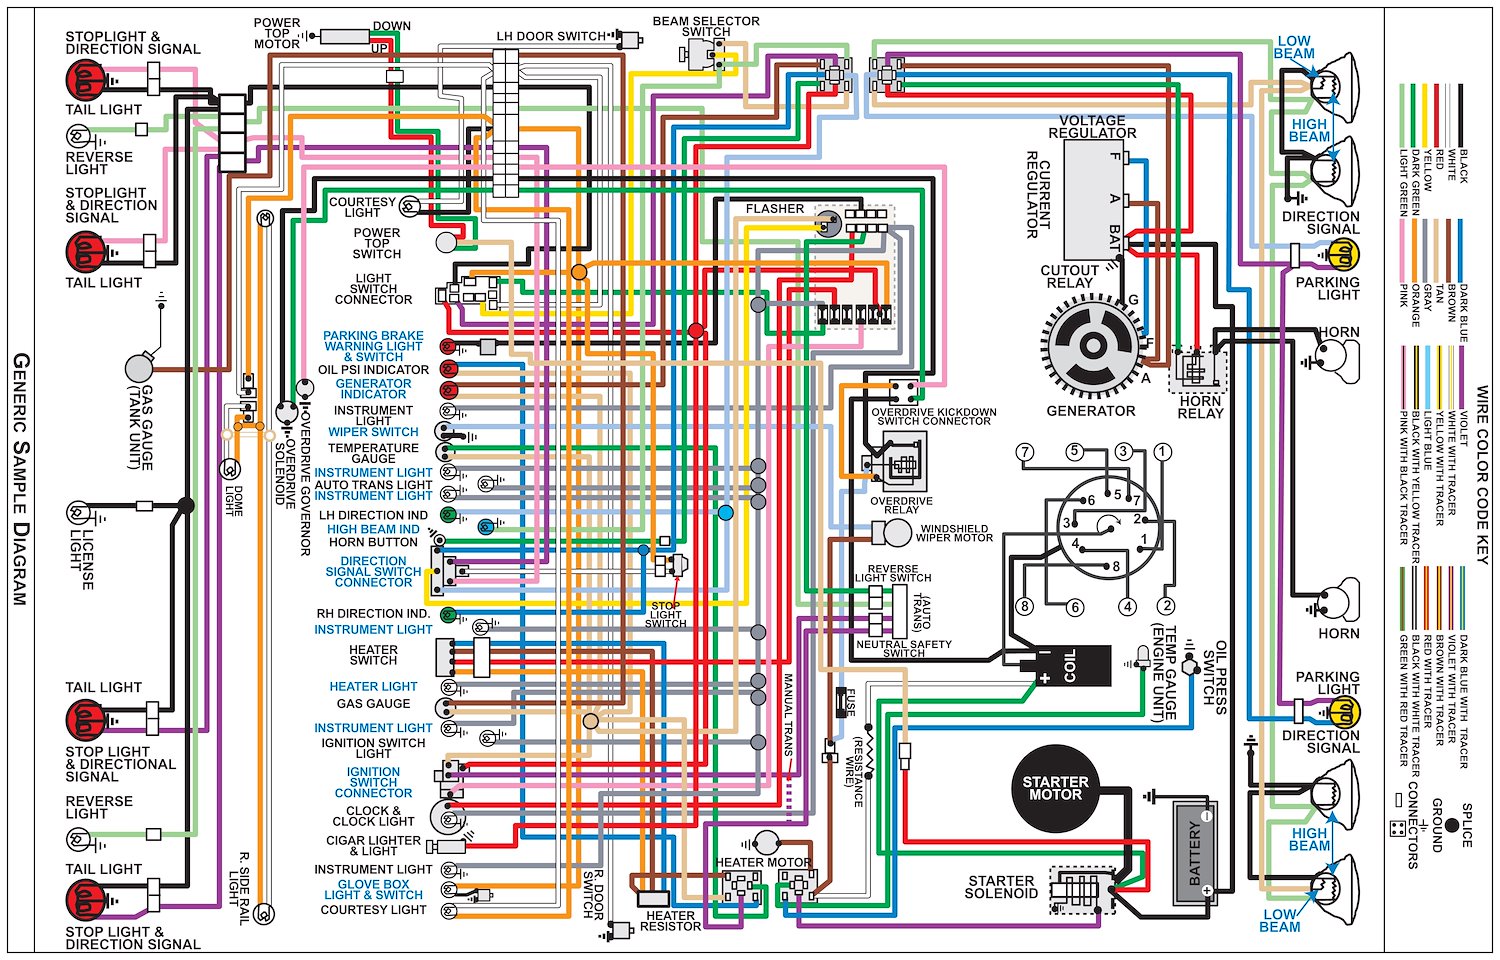 Wiring Diagram for 1974 Dodge Challenger with Rallye Dash, 11 in x 17 in., Laminated